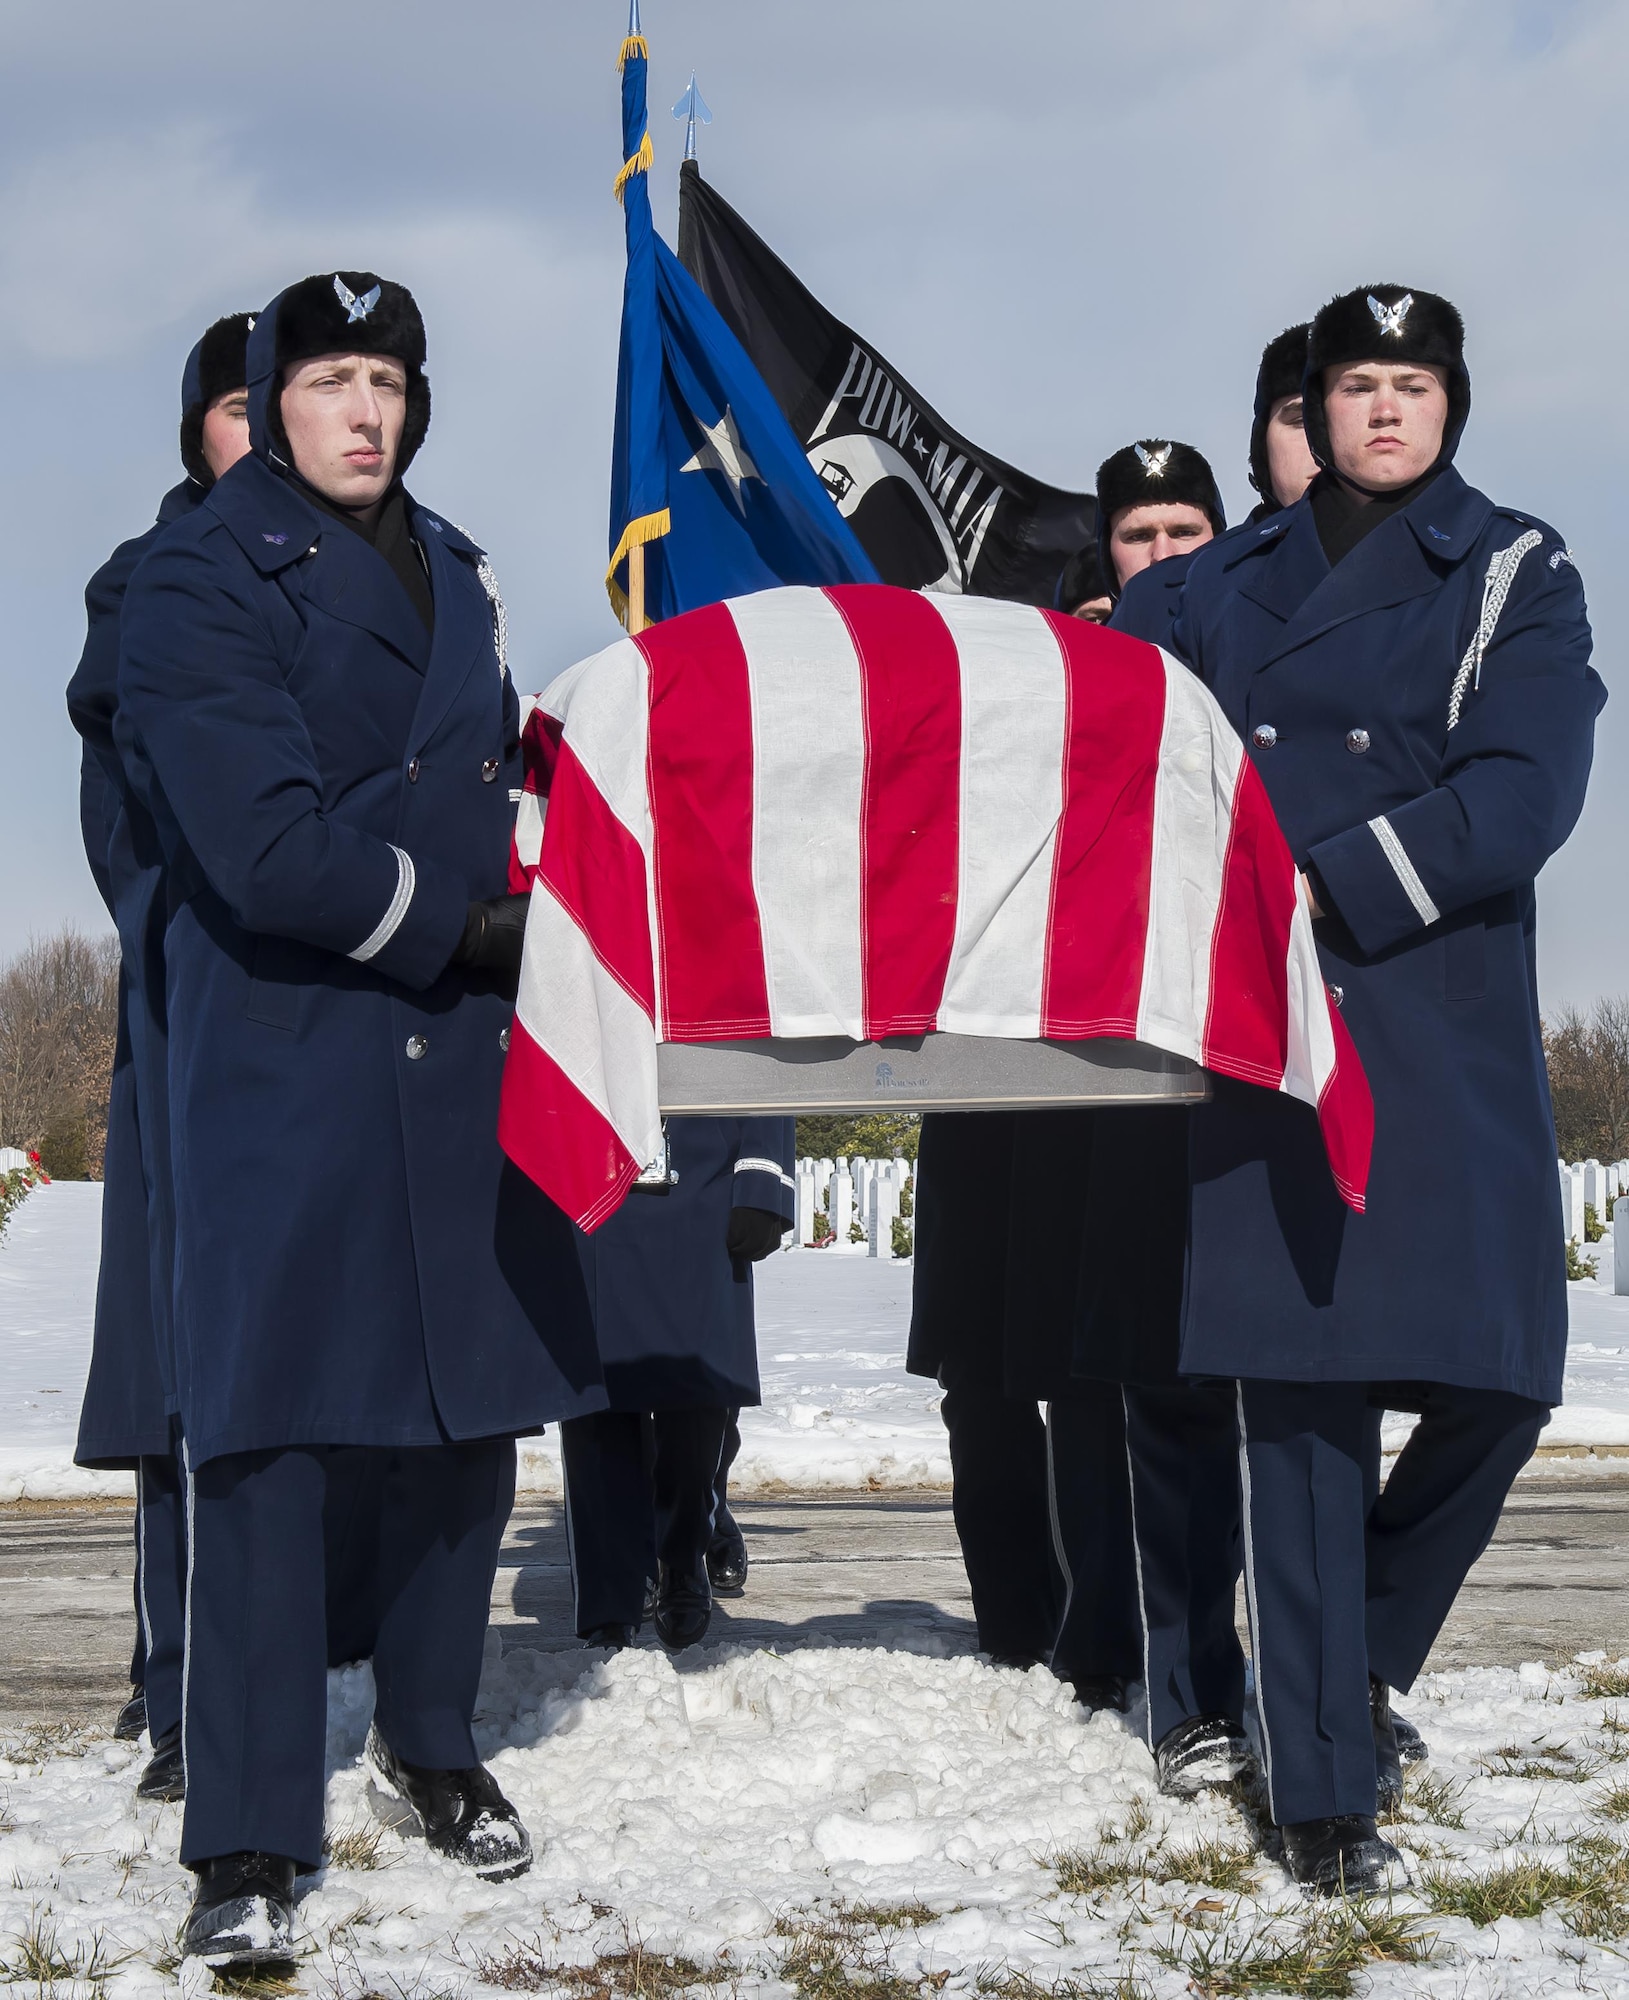 Pall Bearers from the U.S. Air Force Honor Guard carry the casket of Brig. Gen. Robinson "Robbie" Risner to his gravesite during his internment ceremony at Arlington National Cemetery, Arlington, Va., Jan. 23, 2014. Risner was the Air Force's 20th Ace and and survived  seven and a half years of captivity as a Prisoner of War (POW) in Hoa Lo Prison, a.k.a the Hanoi Hilton. during the Vietnam War. (U.S. Air Force photo/Jim Varhegyi)                                                                                                                                                                                                                                                                                                                 